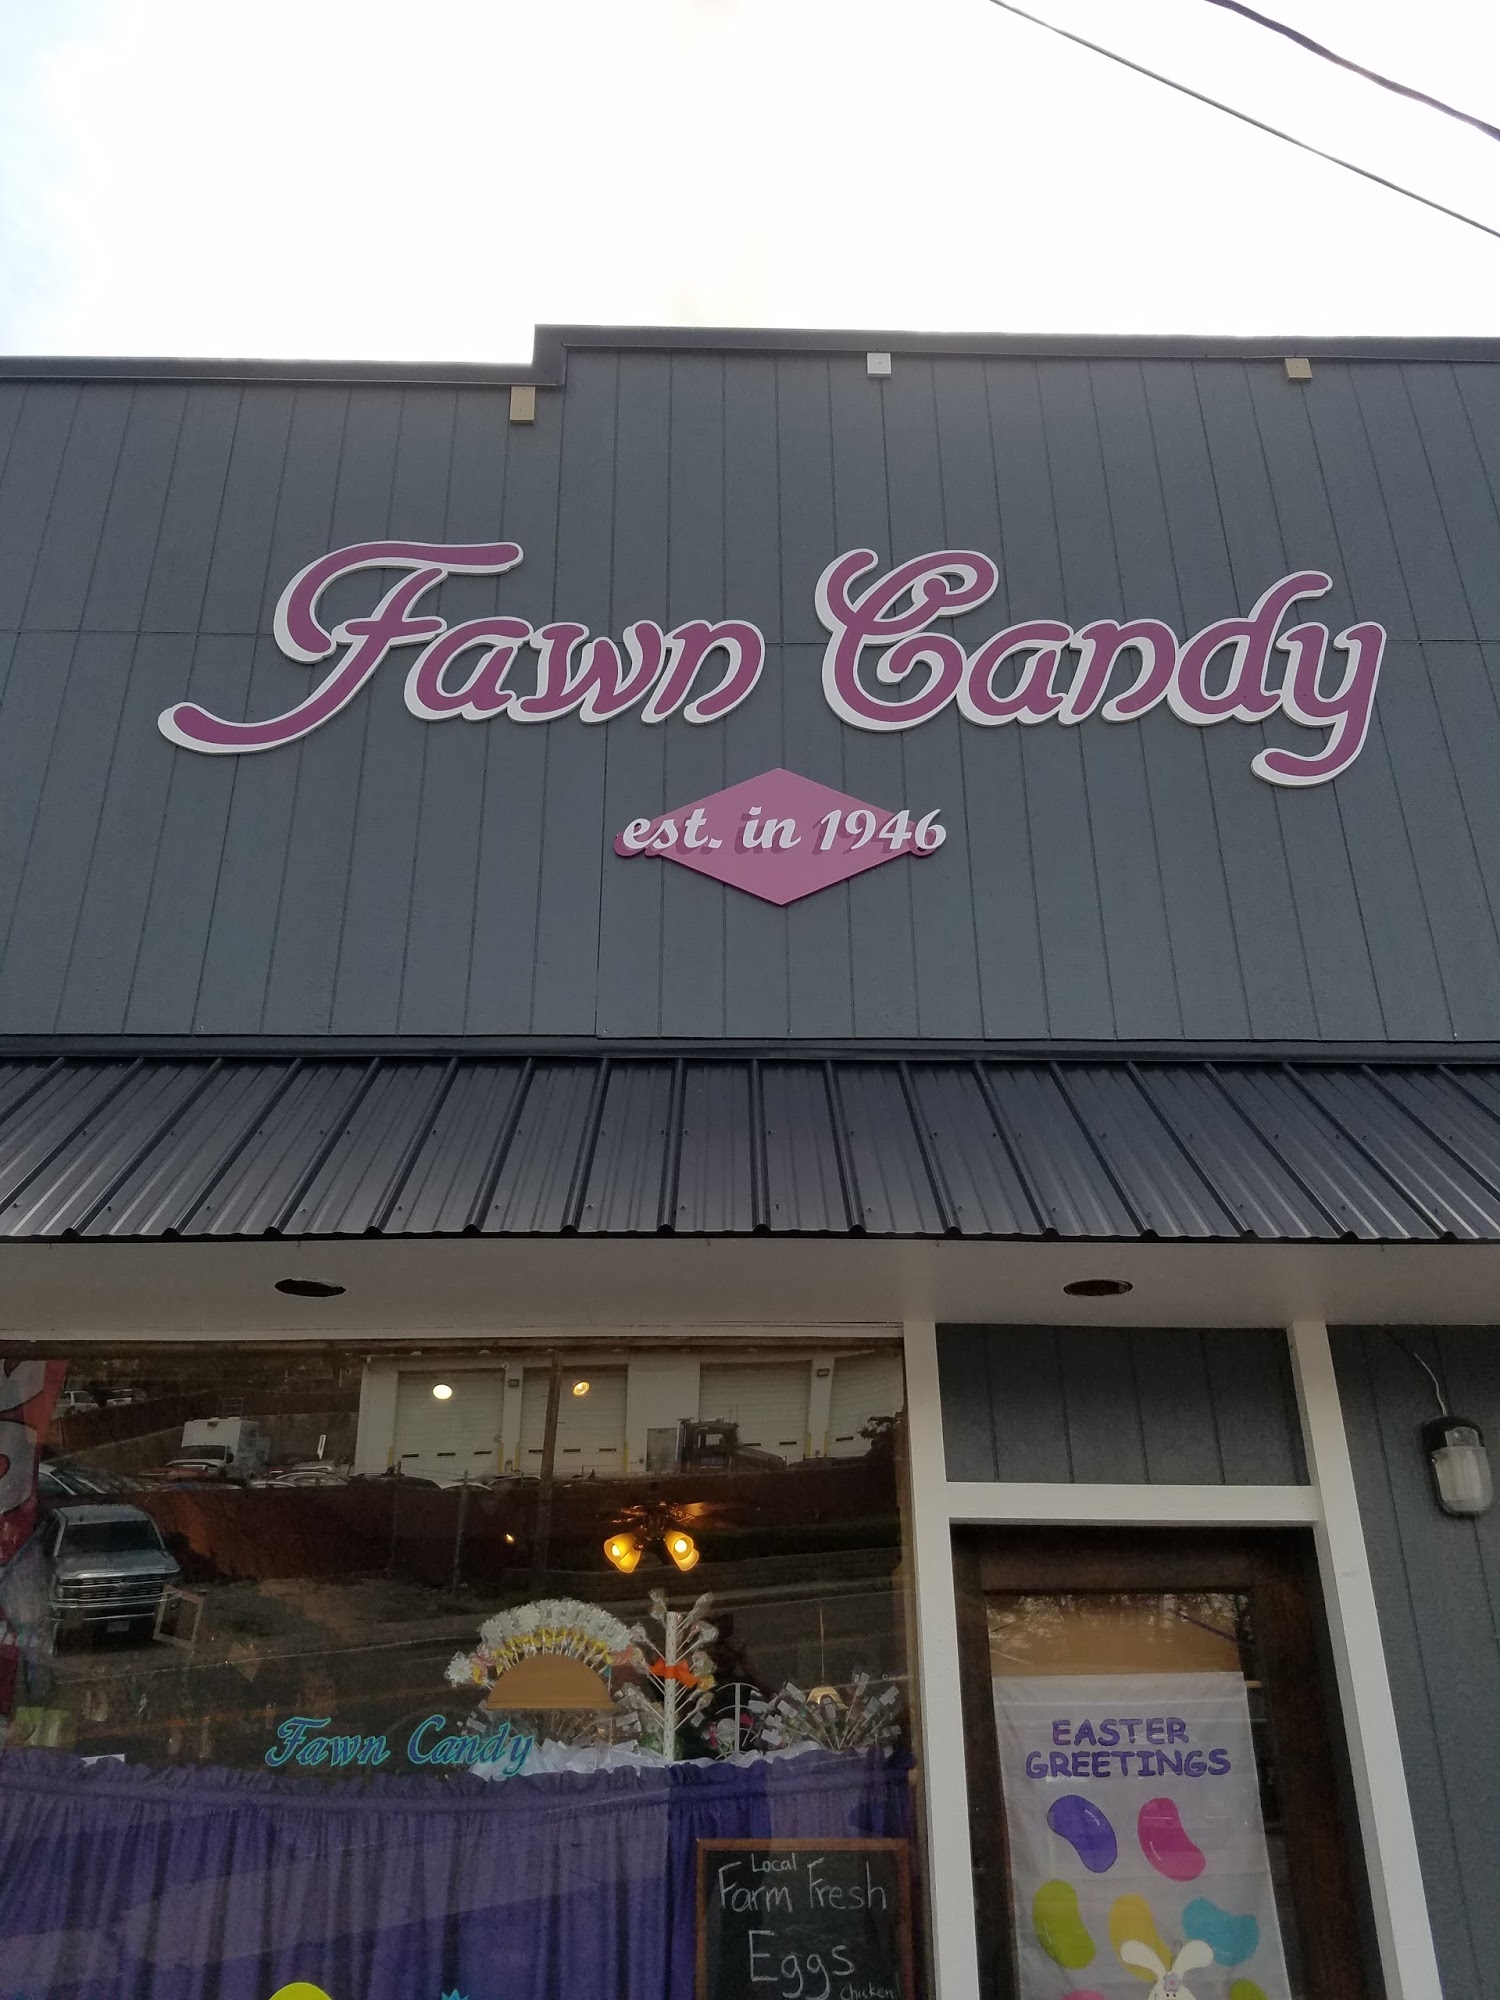 Fawn Candy